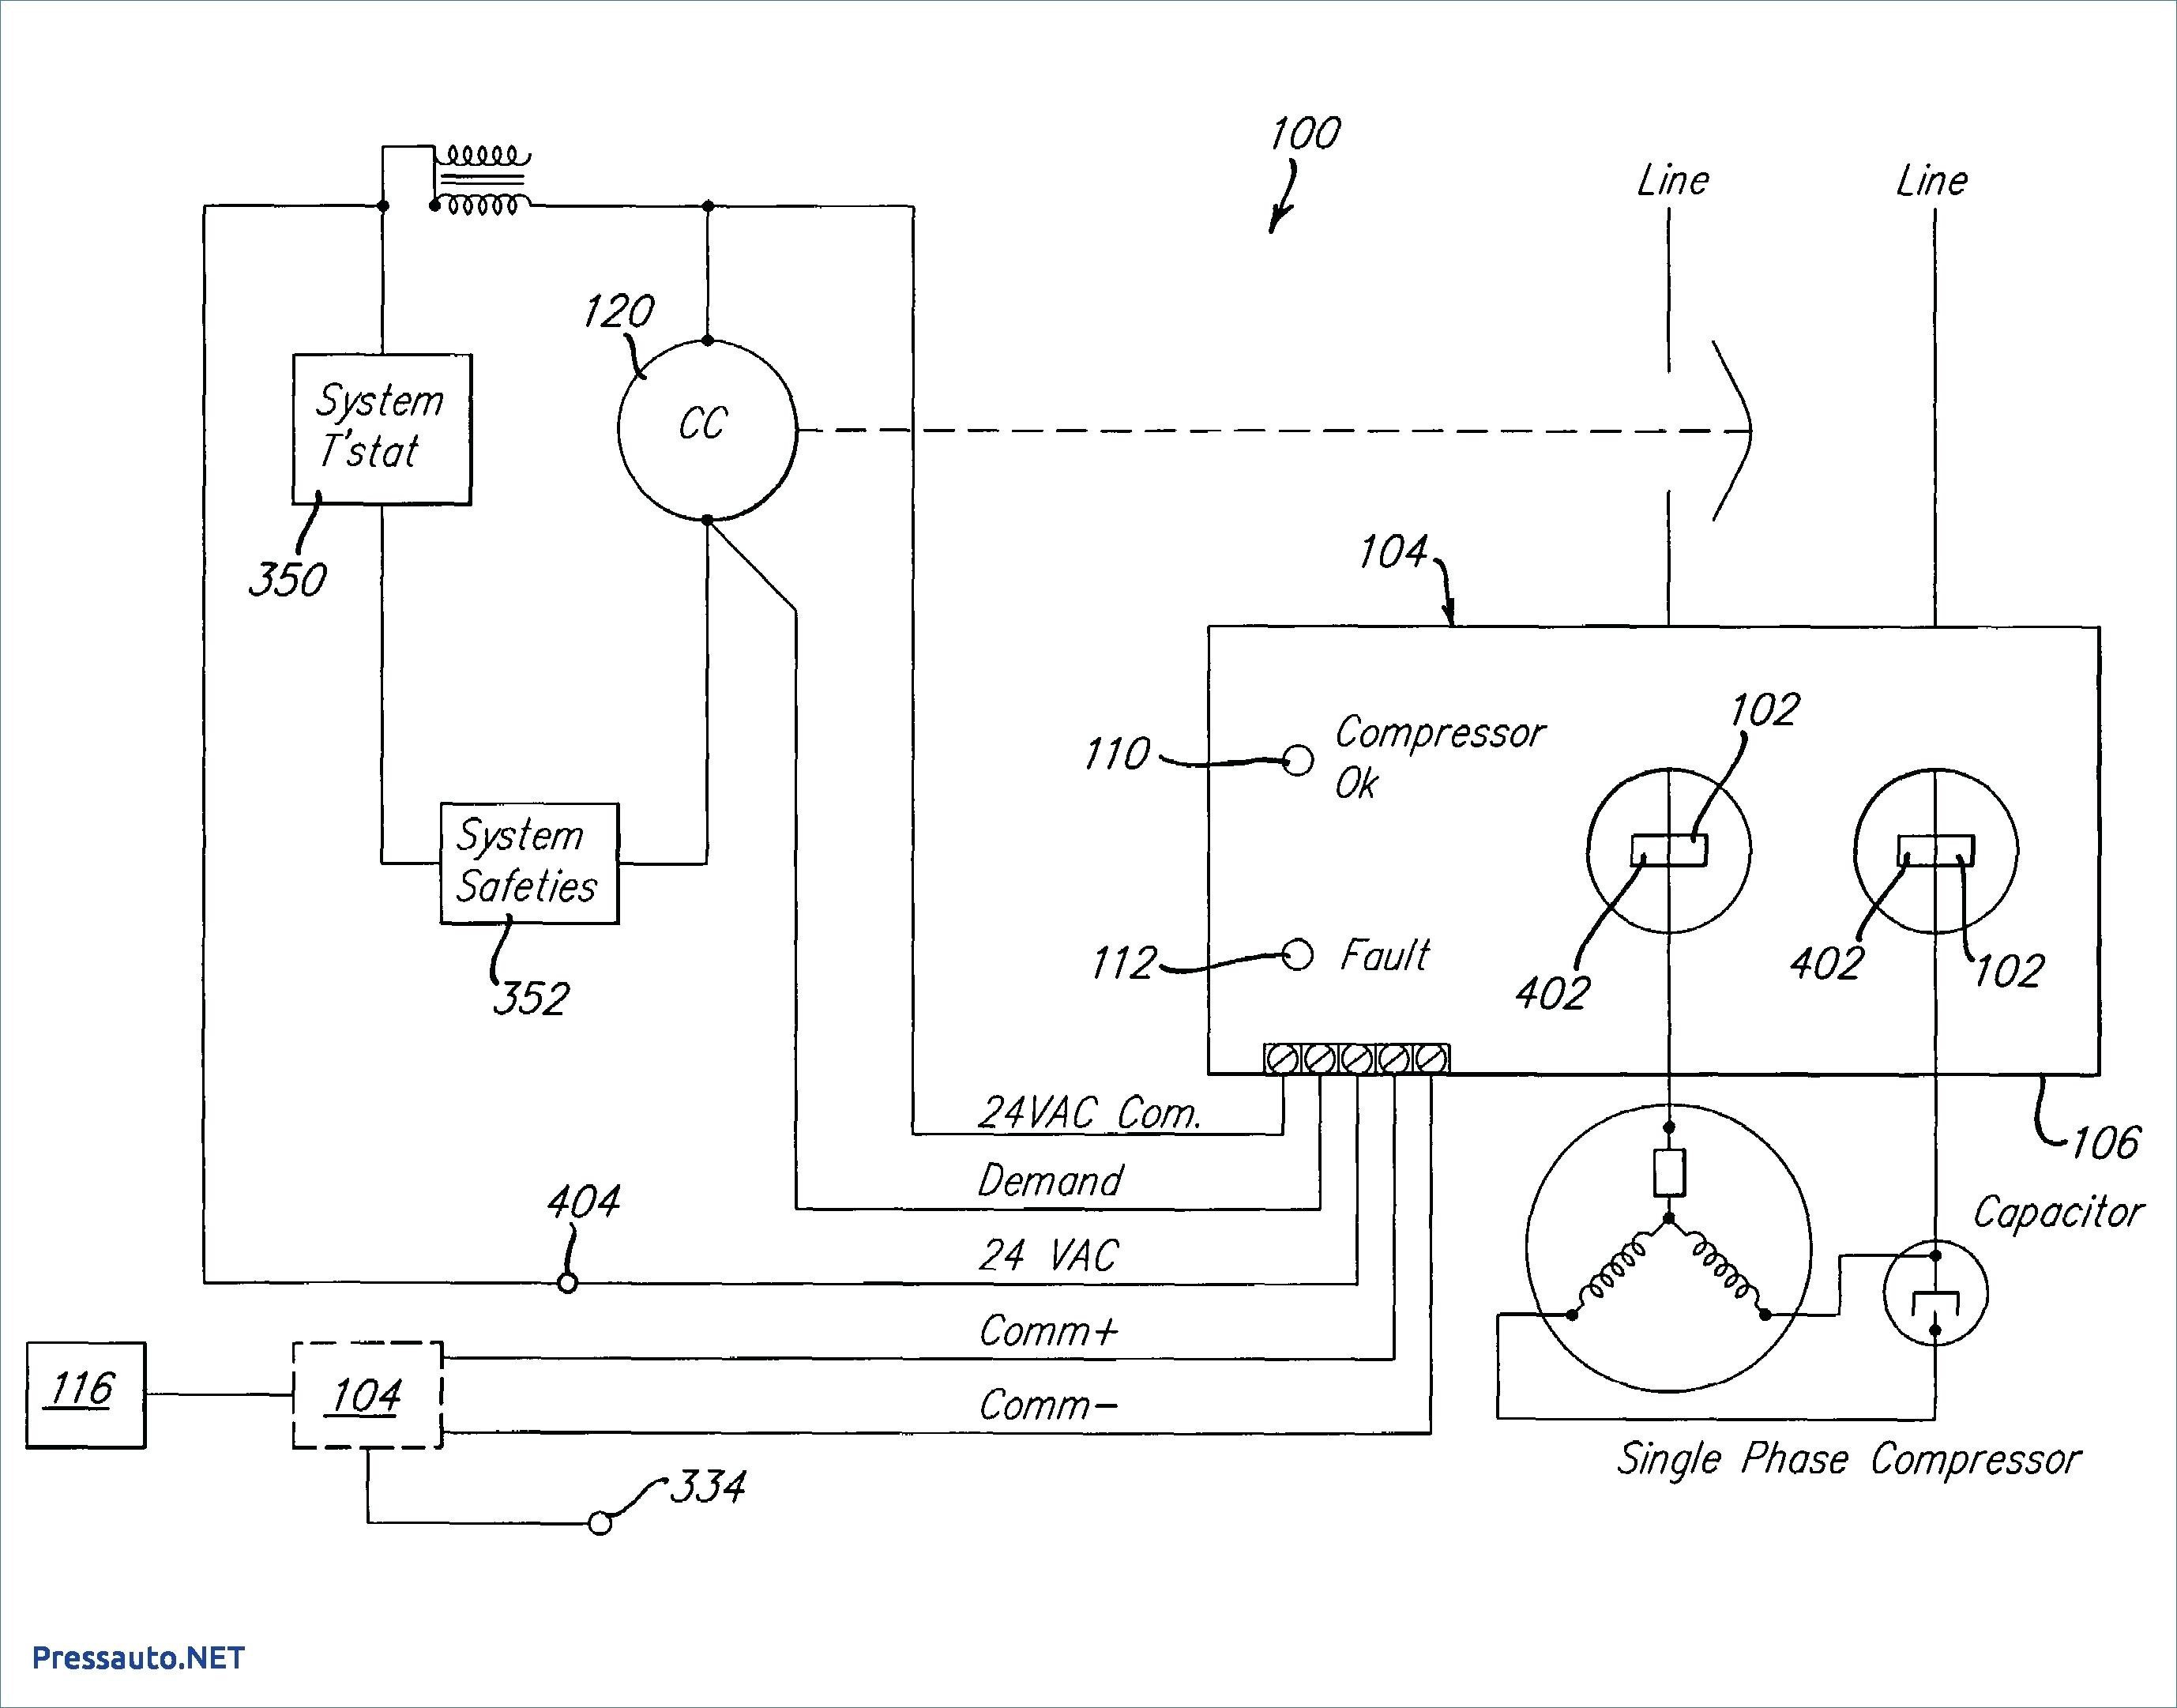 Wiring Diagram To her With Refrigerator Pressor Wiring Diagram